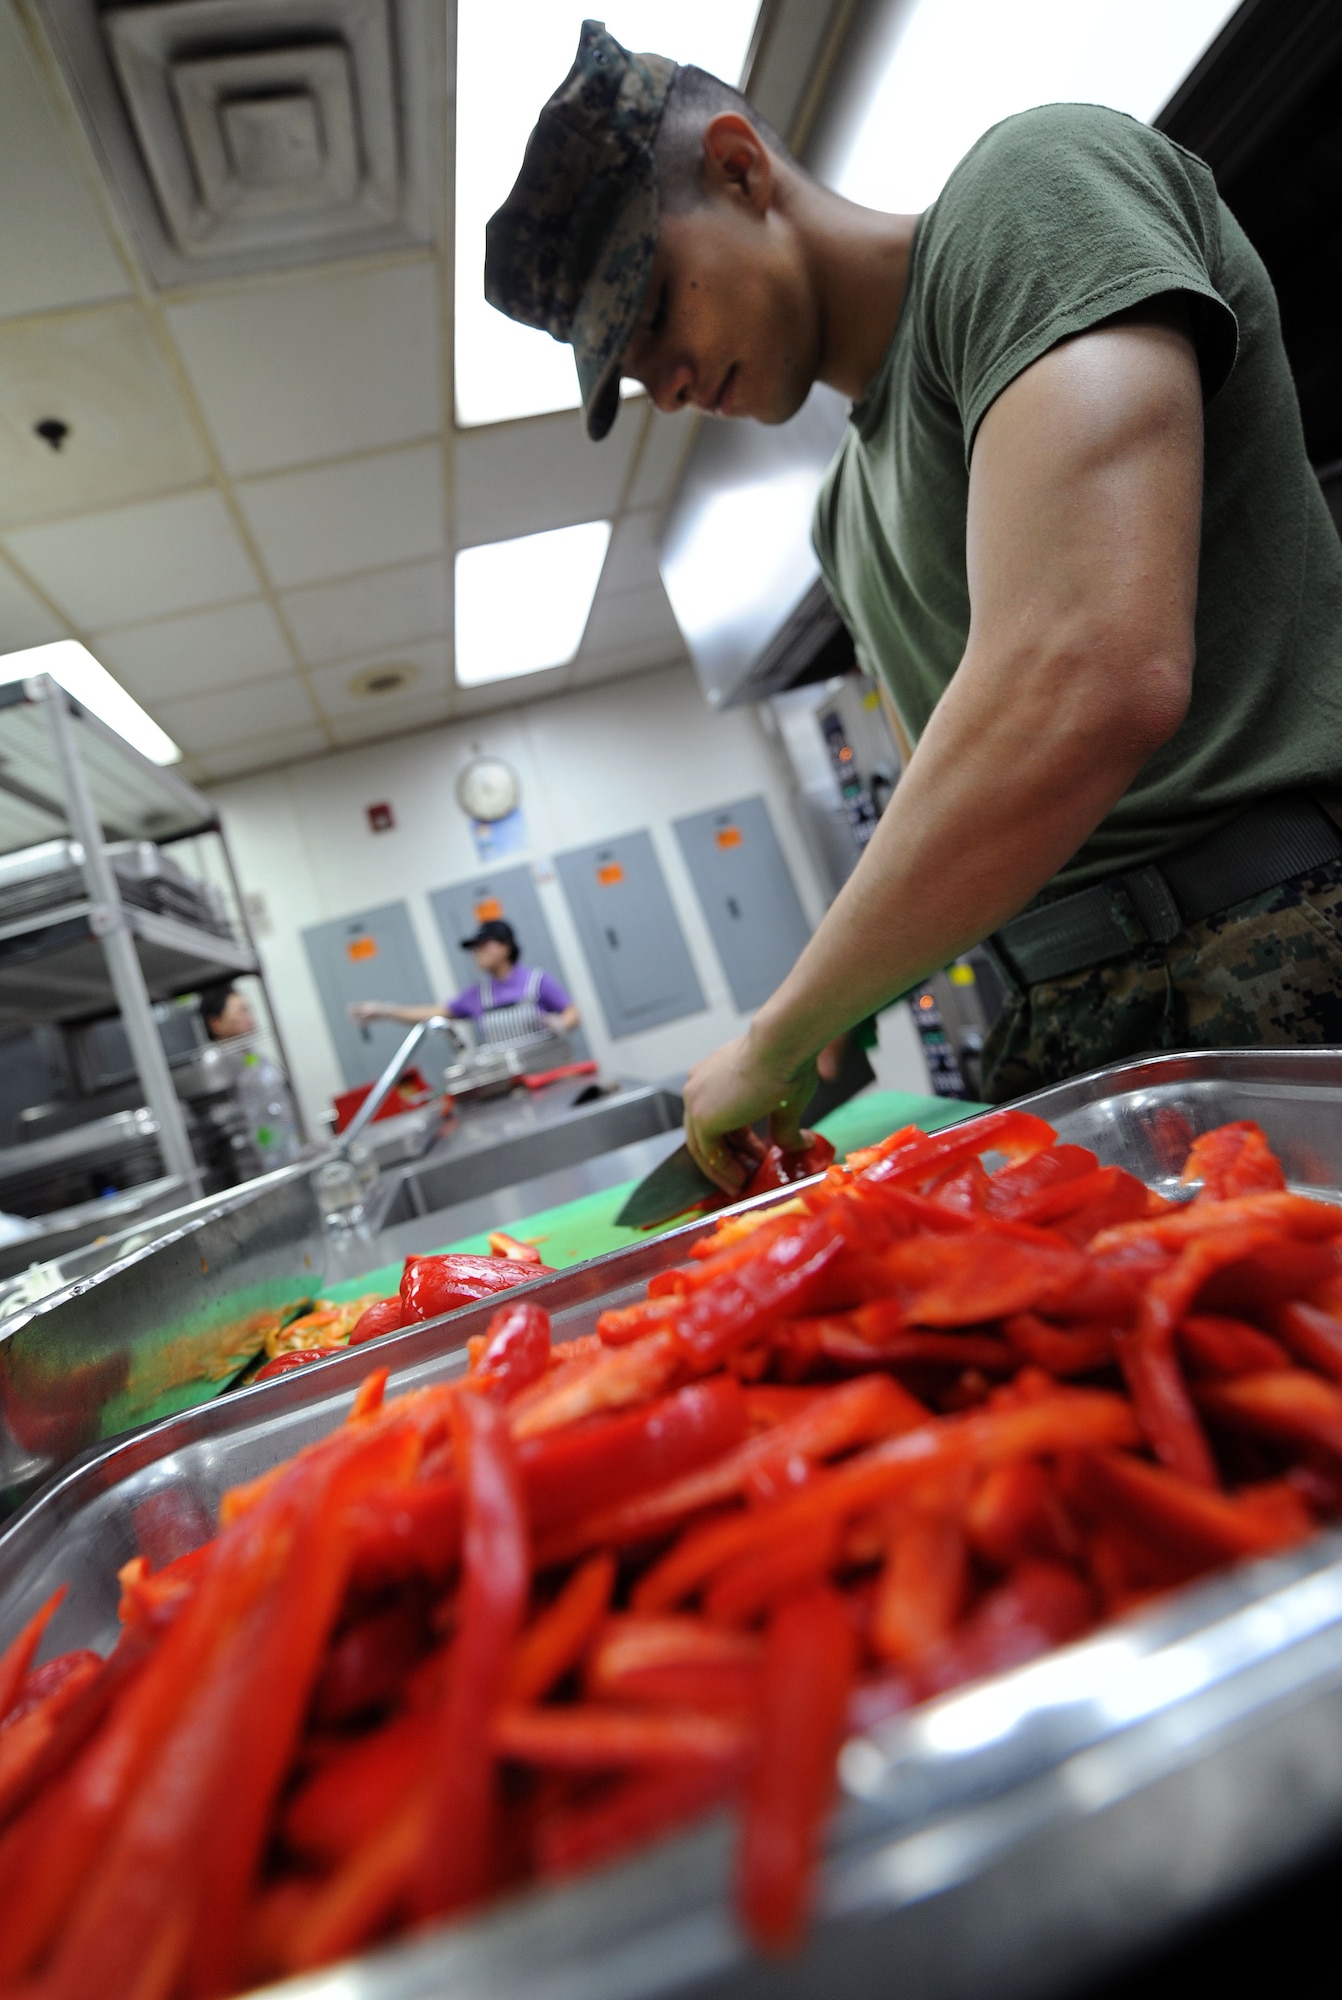 Cpl. Alan Peterson, Marine Wing Squadron Support 171 food service specialist, slices red peppers in preparation for dinner at the Ginko Tree dining facility at Osan Air Base, Republic of Korea April 23, 2013. Shift workers at the DFAC prepare the different meals, work the grill, temperature check food and make sure the facility remains clean as a part of their job every day. (U.S. Air Force photo/Staff Sgt. Sara Csurilla)